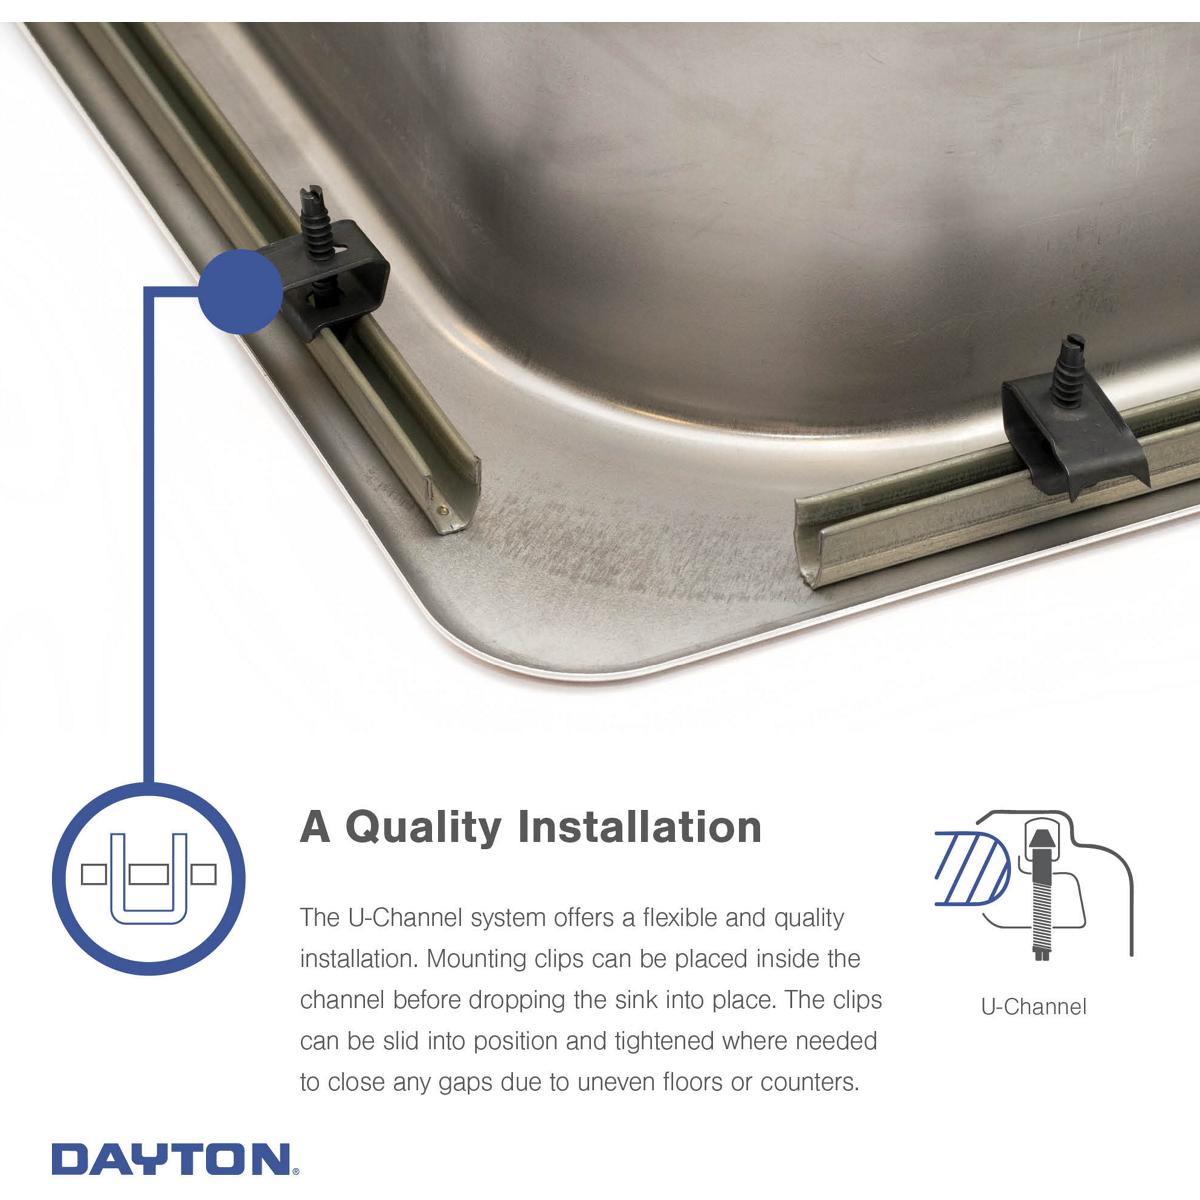 Elkay Dayton Stainless Steel 33" x 22" x 7-1/16" Equal Double Bowl Drop-in Sink and Faucet Kit